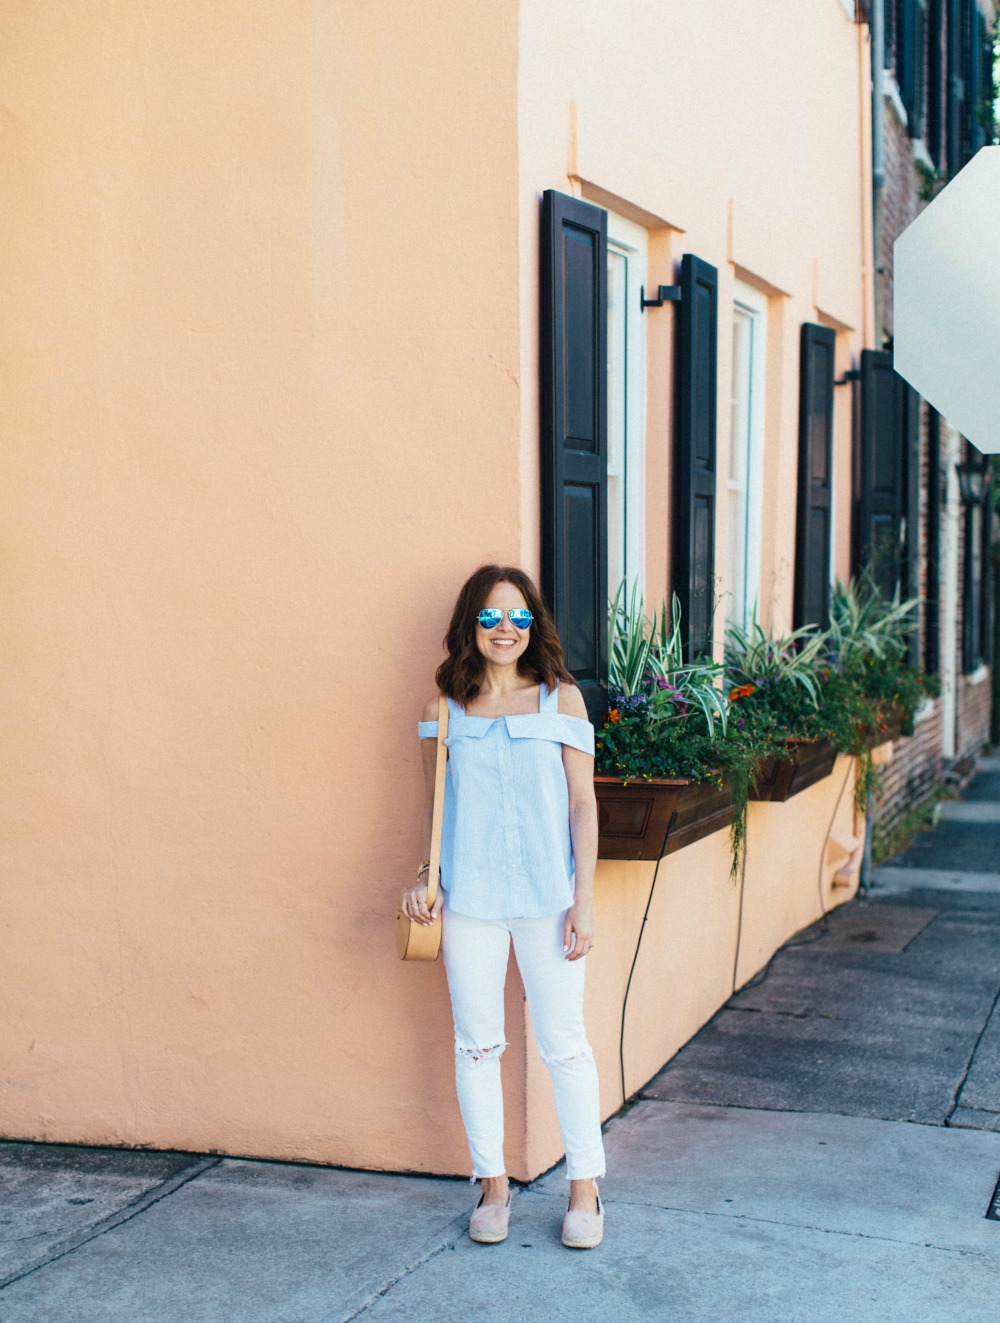 classic summer uniform in blue & white // the modern savvy, a life & style blog